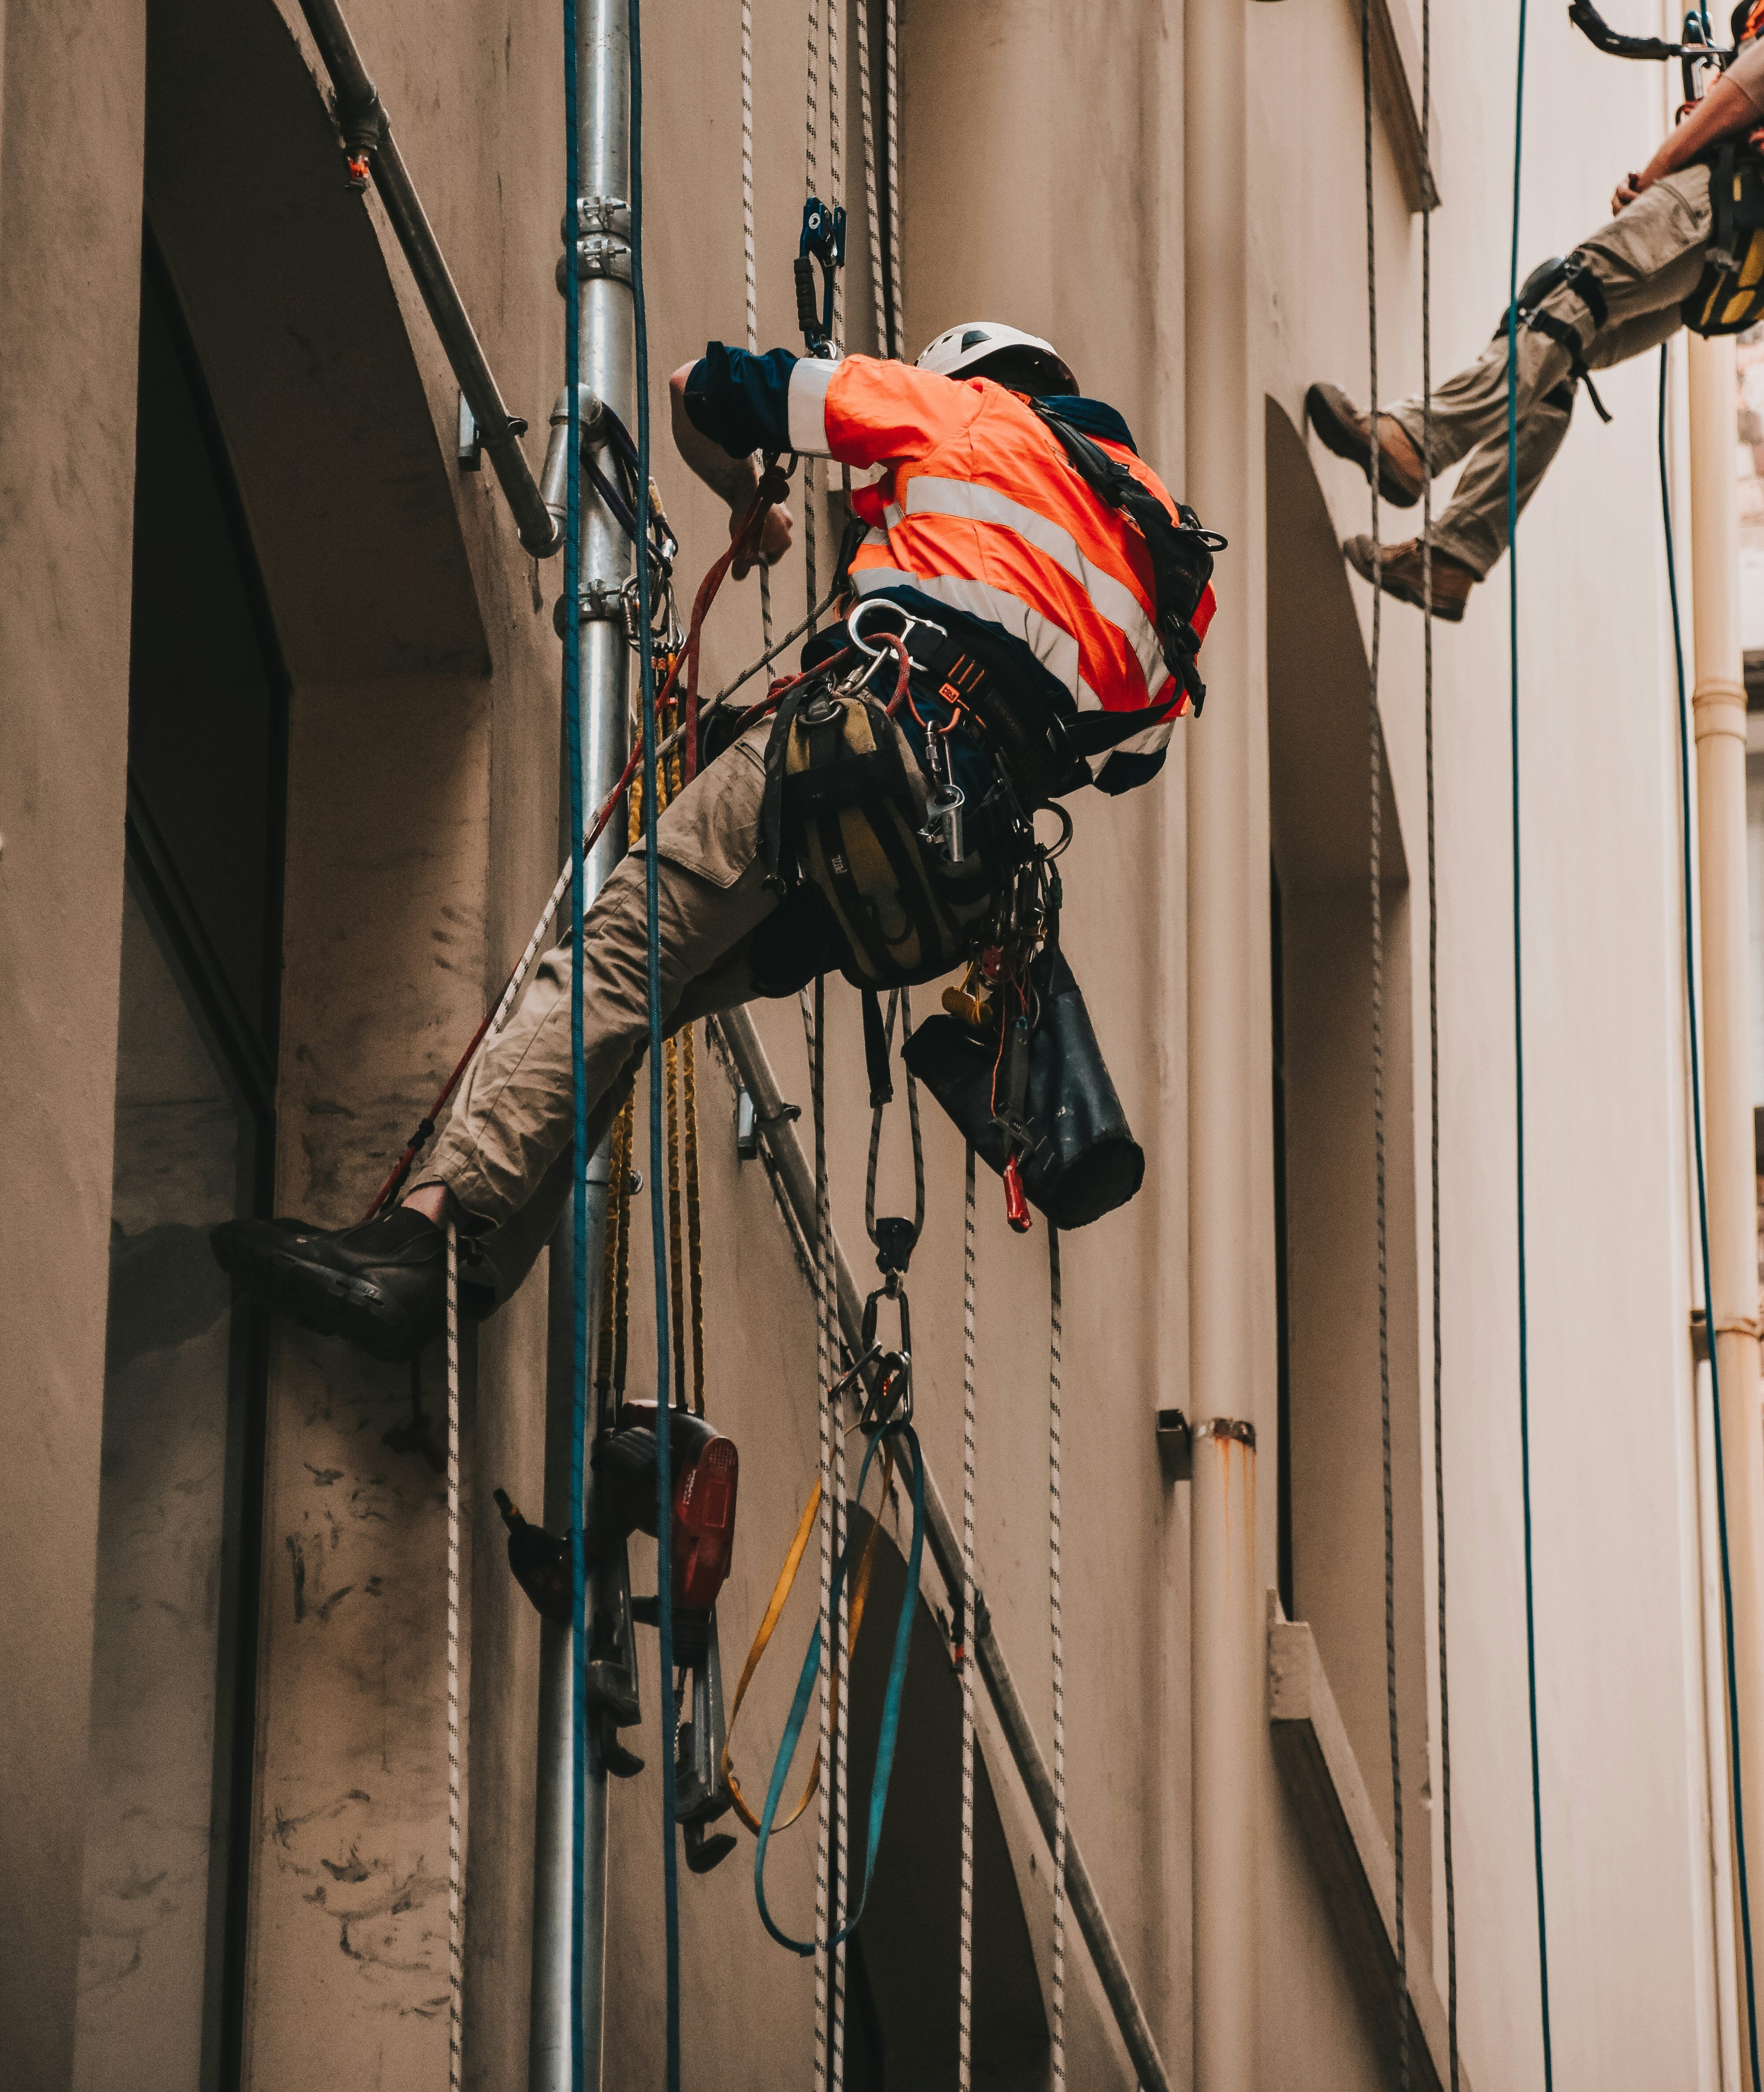  worker wearing safety harness while on side of building